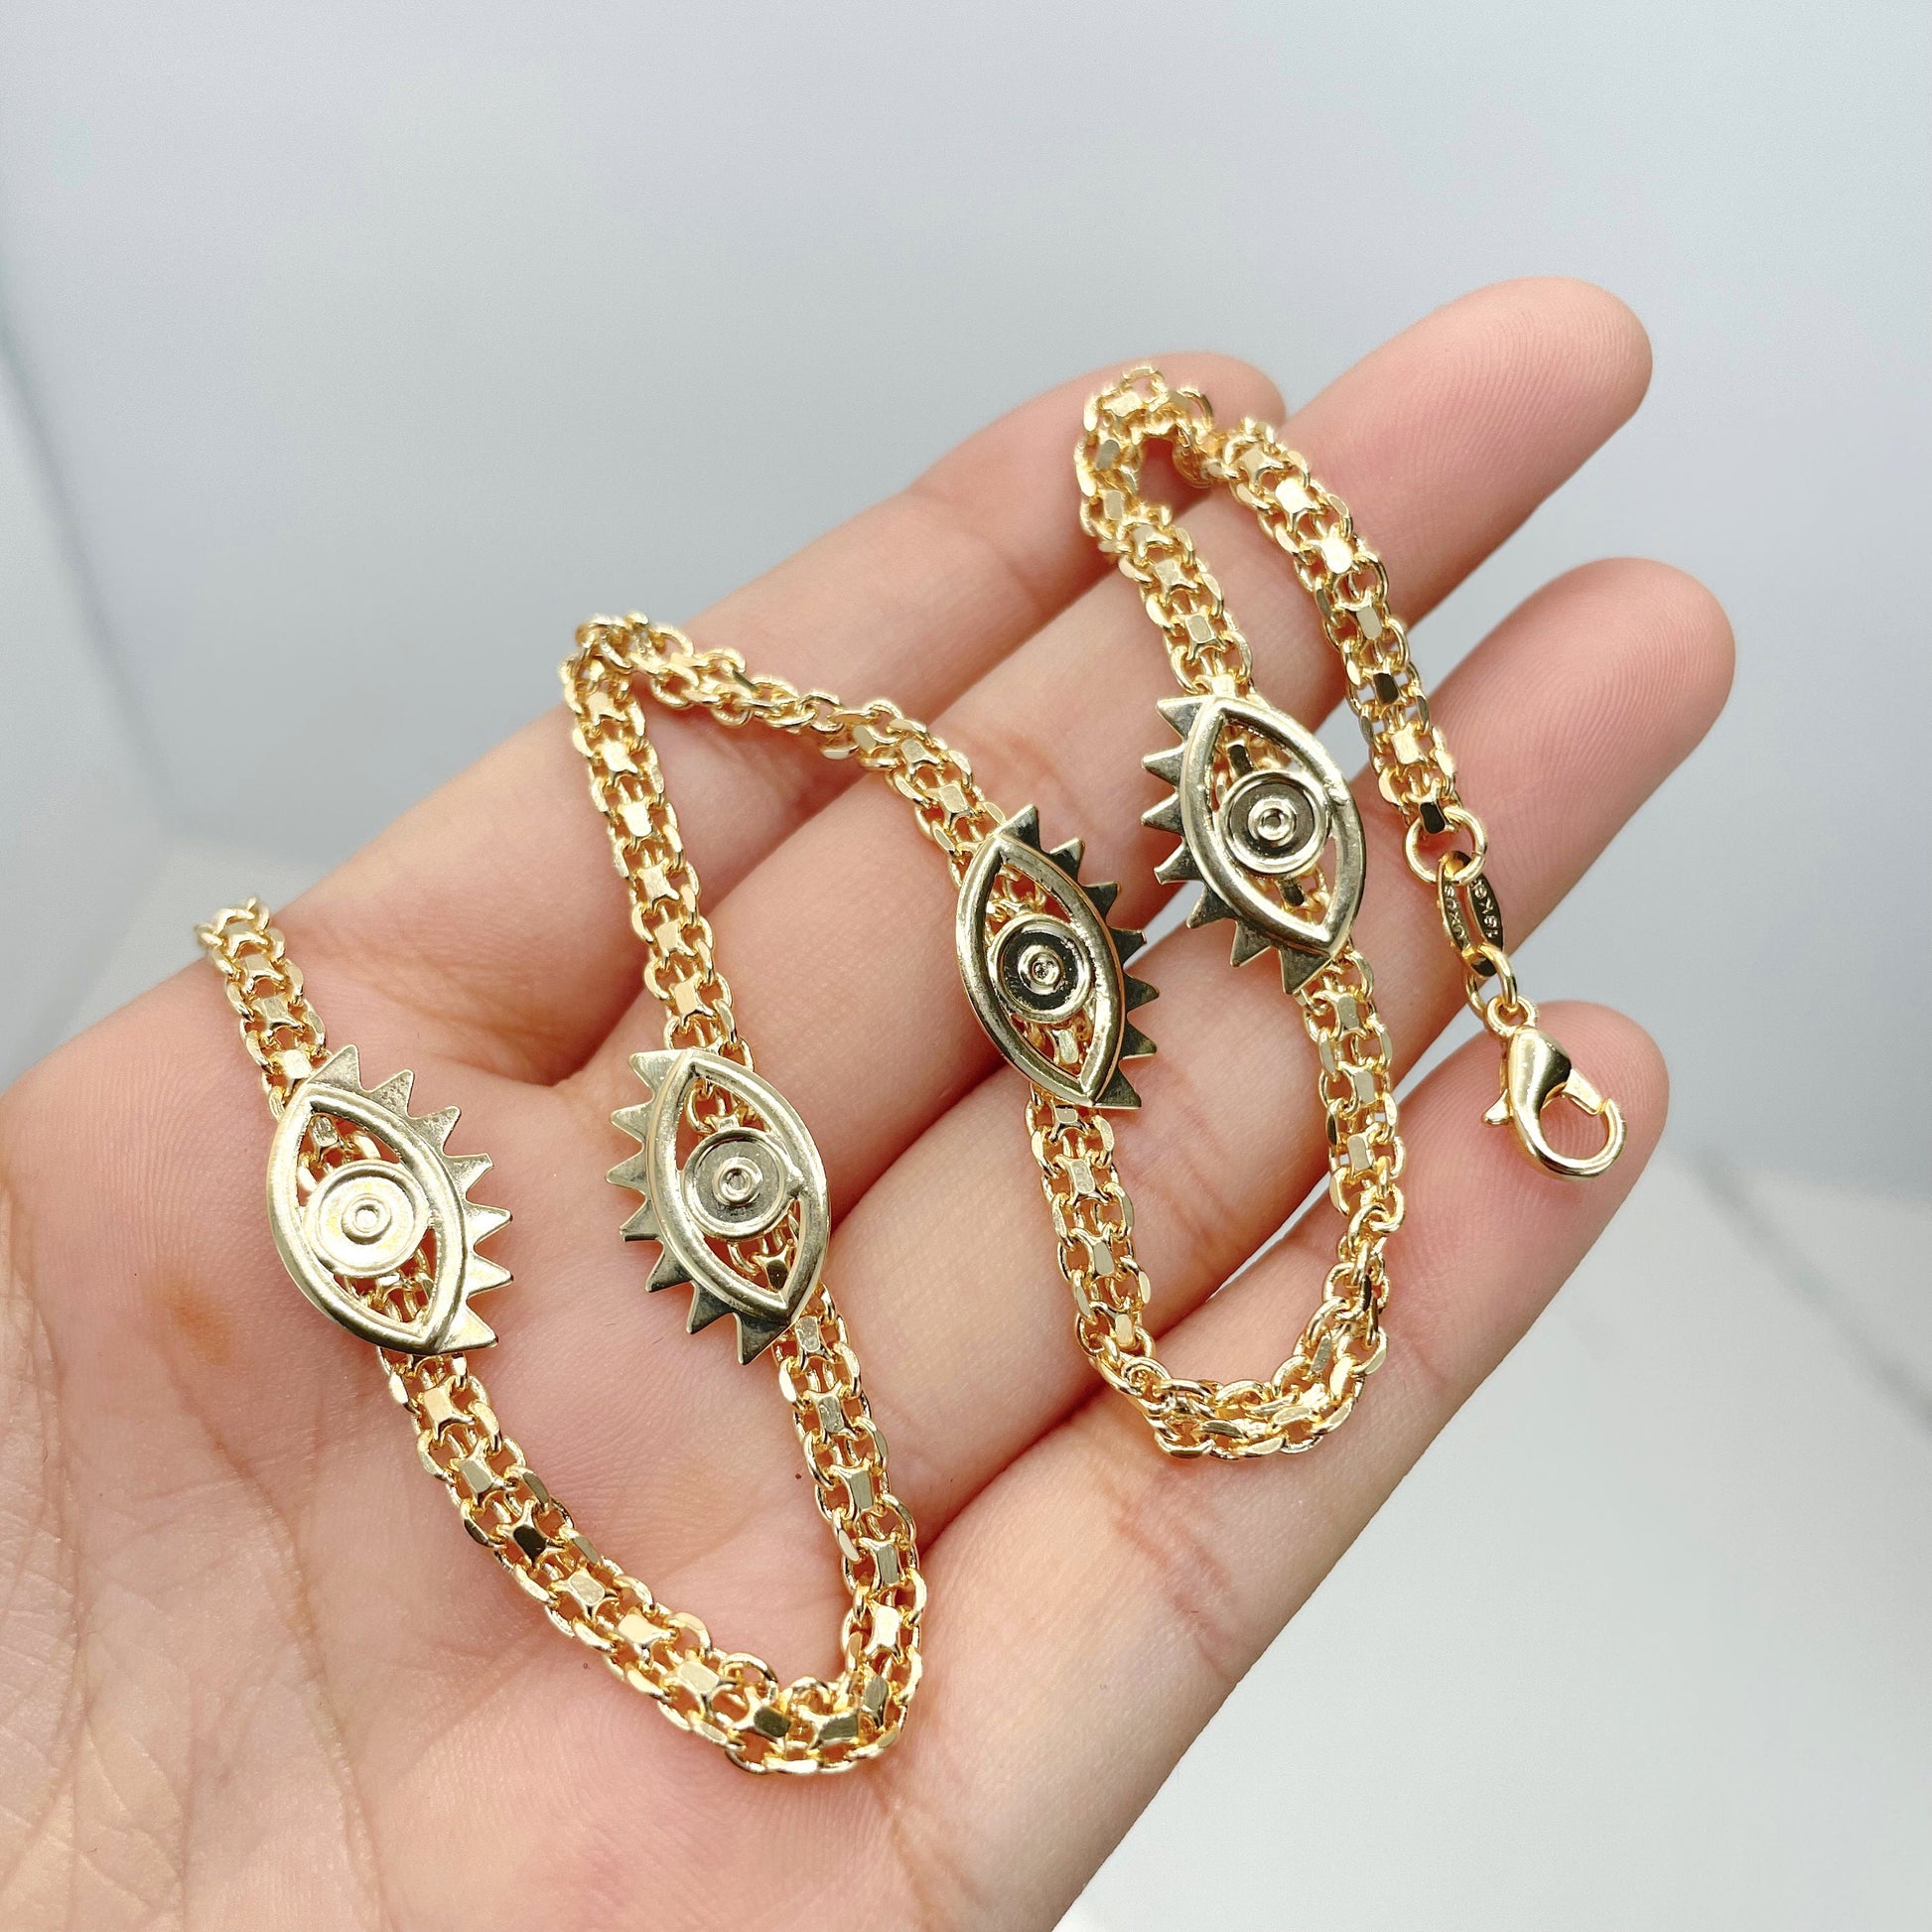 18k Gold Filled 4mm Double Oval Chain, Evil Eyes Charms Necklace or Bracelet Wholesale Jewelry Making Supplies